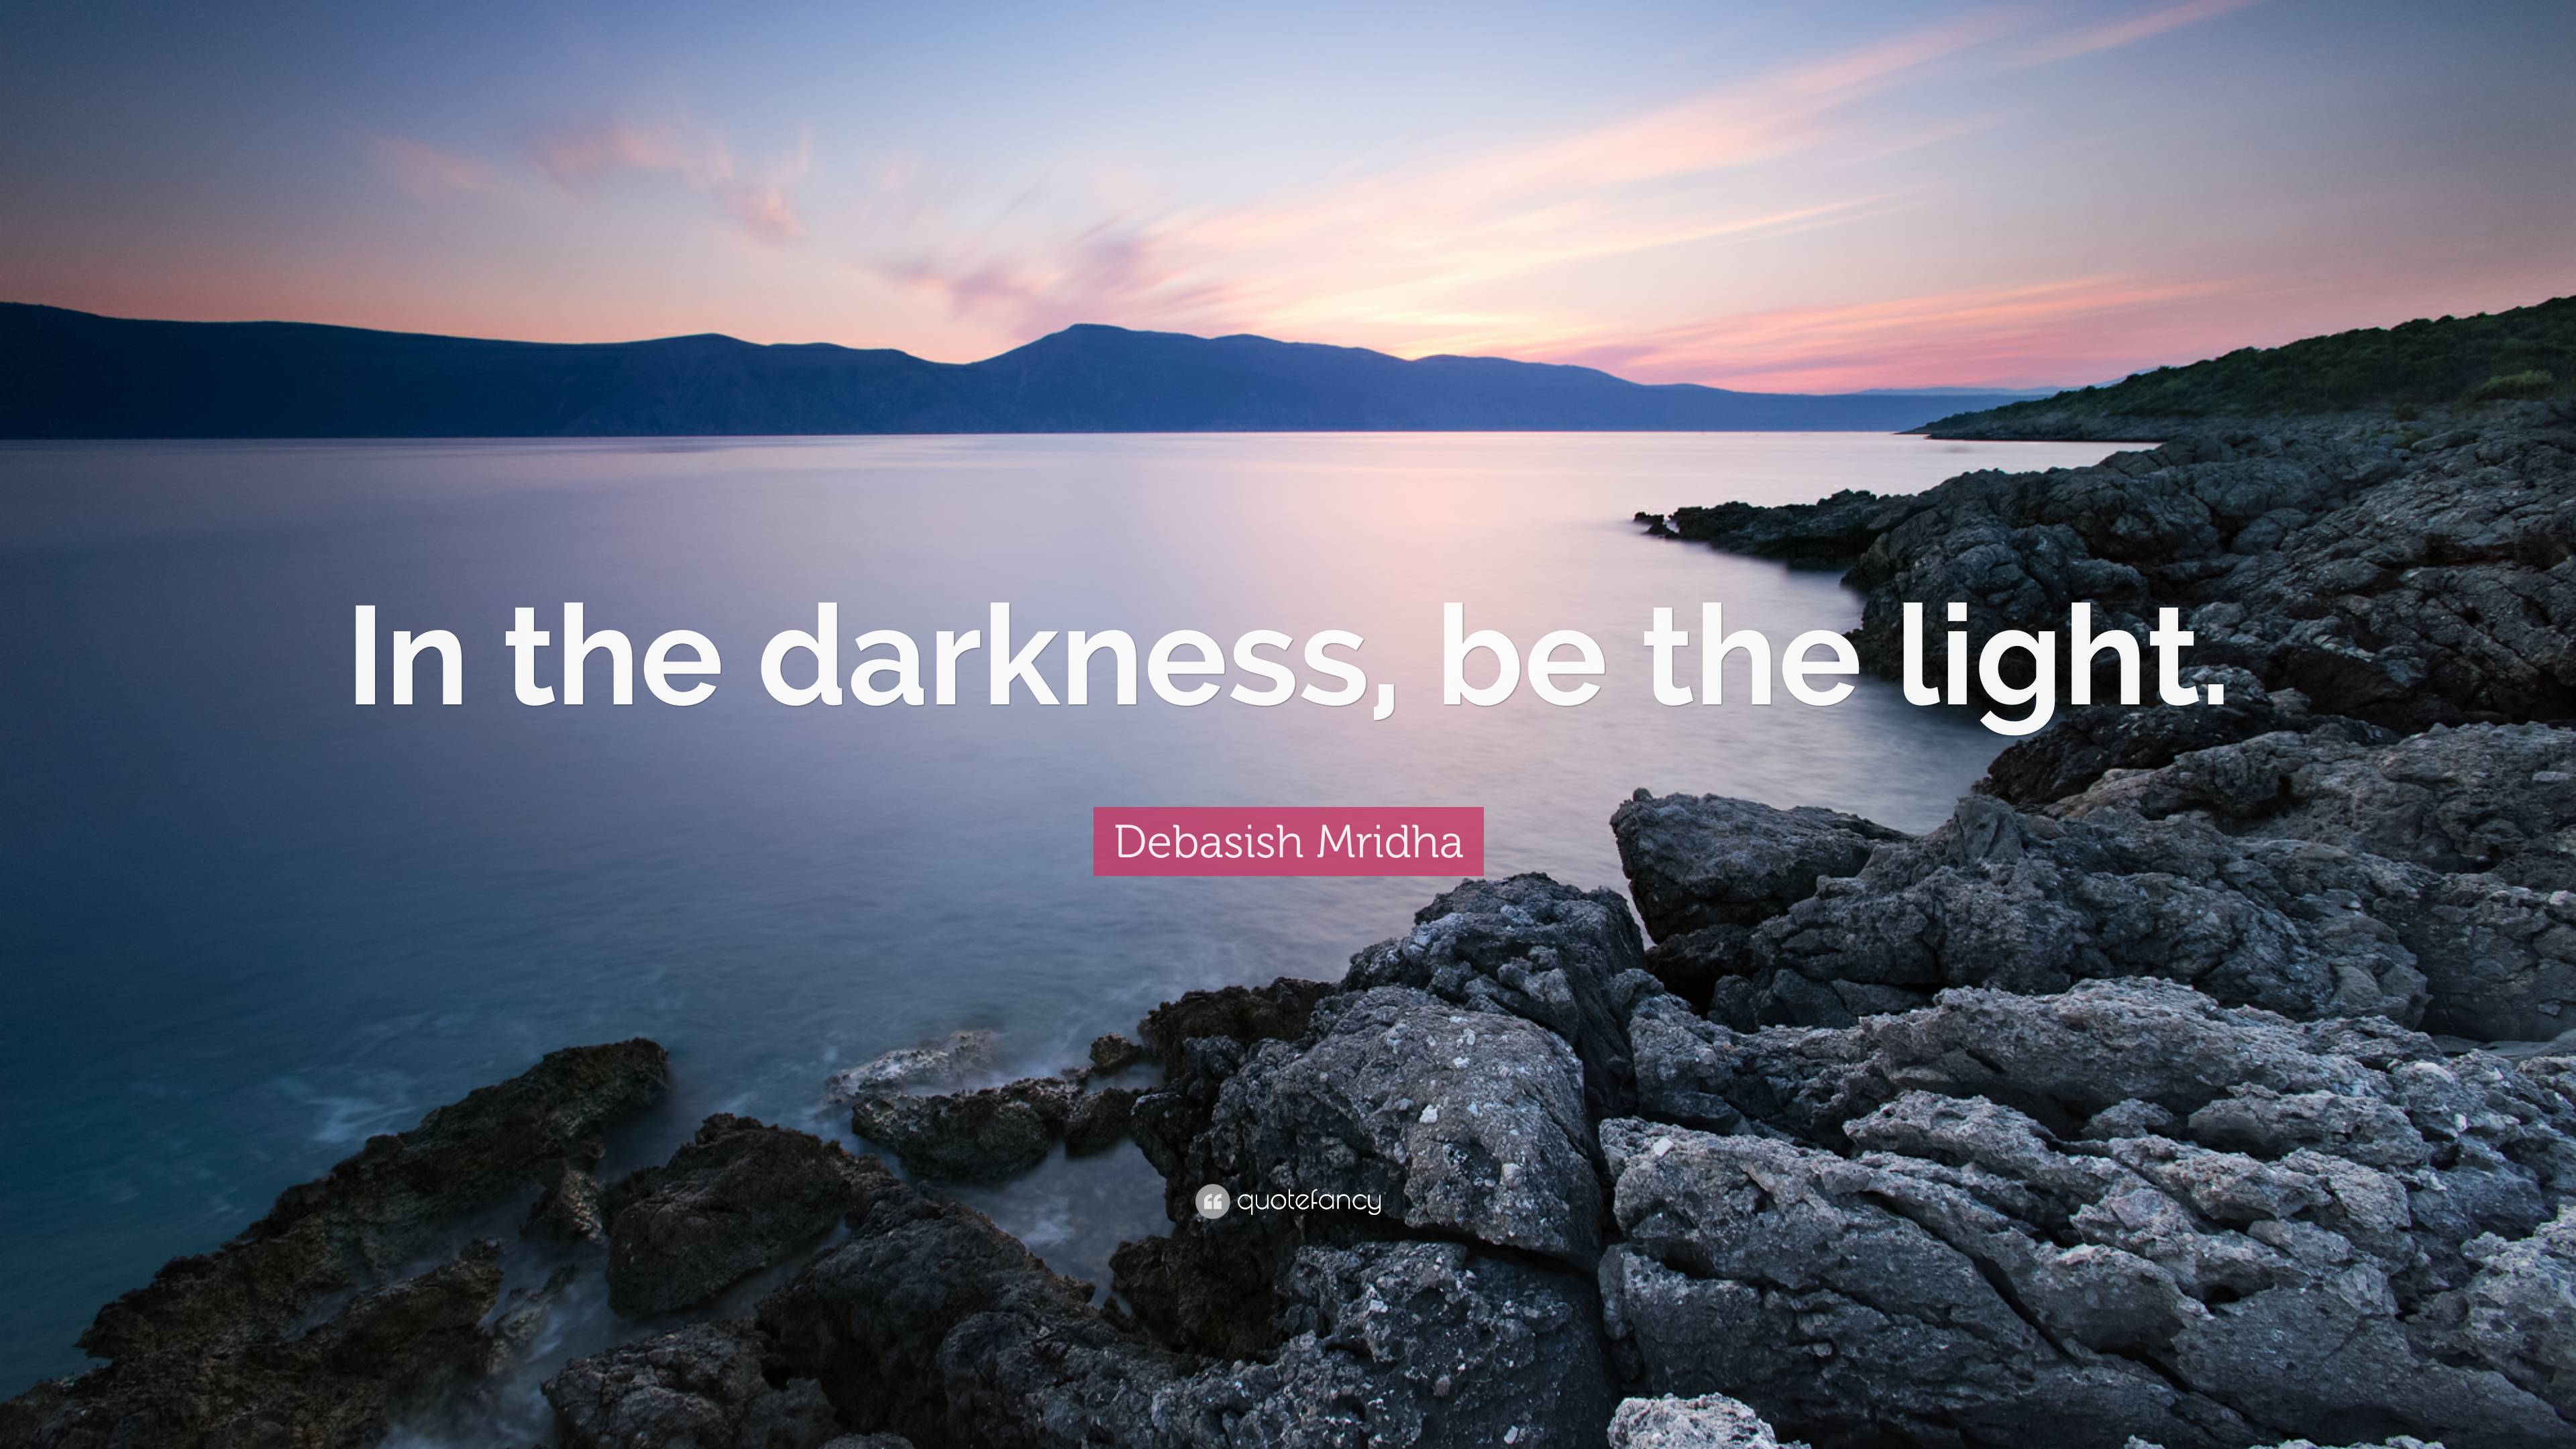 Debasish Mridha Quote: “In the darkness, be the light.”